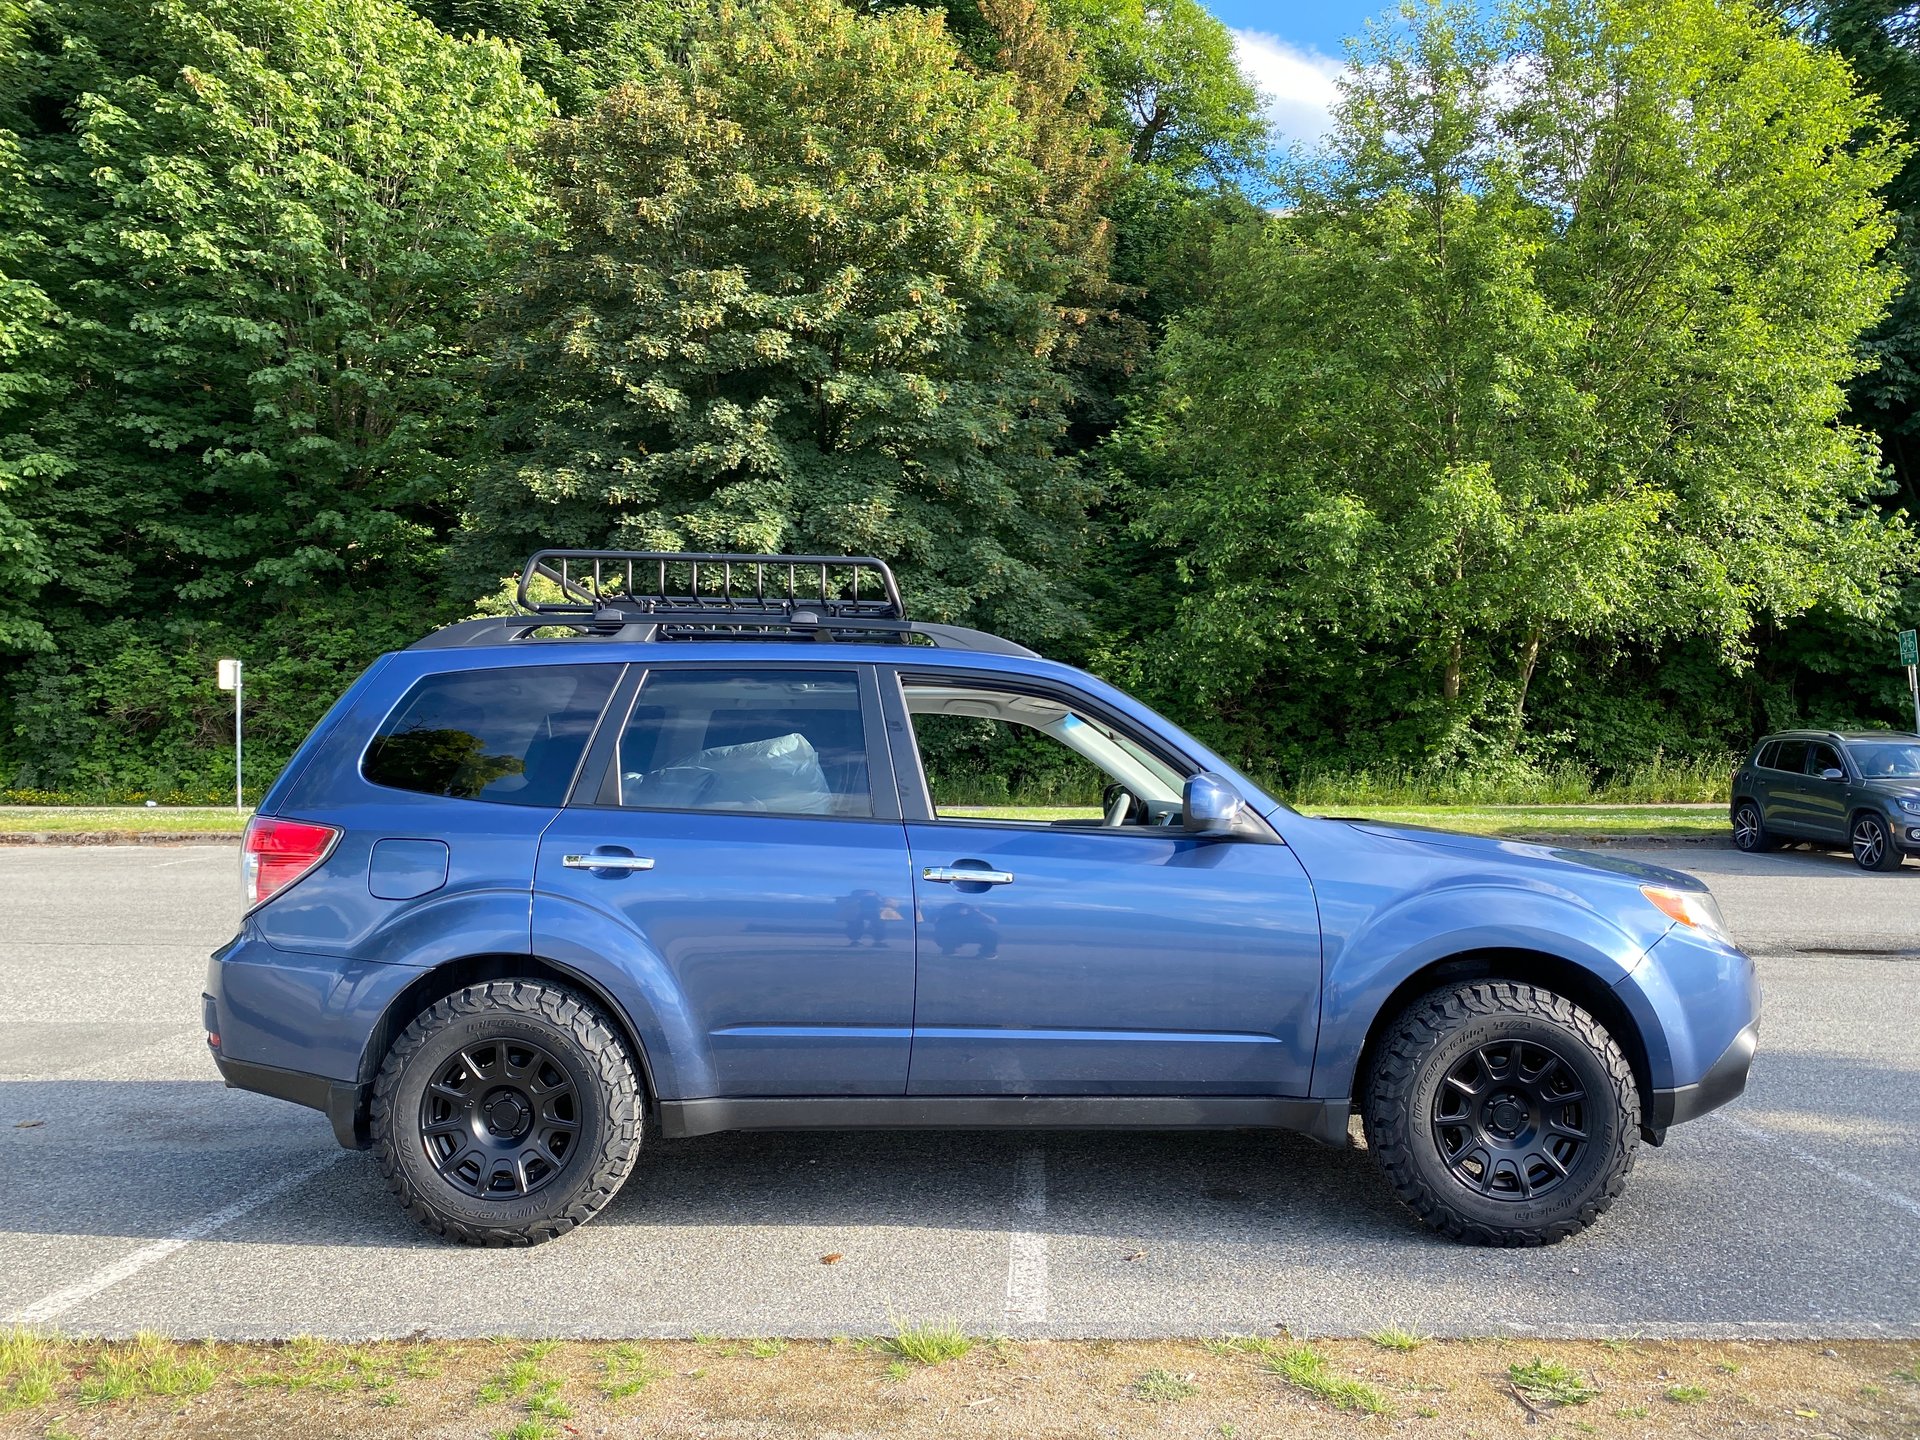 2011 Forester Off-road Build | Subaru Forester Owners Forum